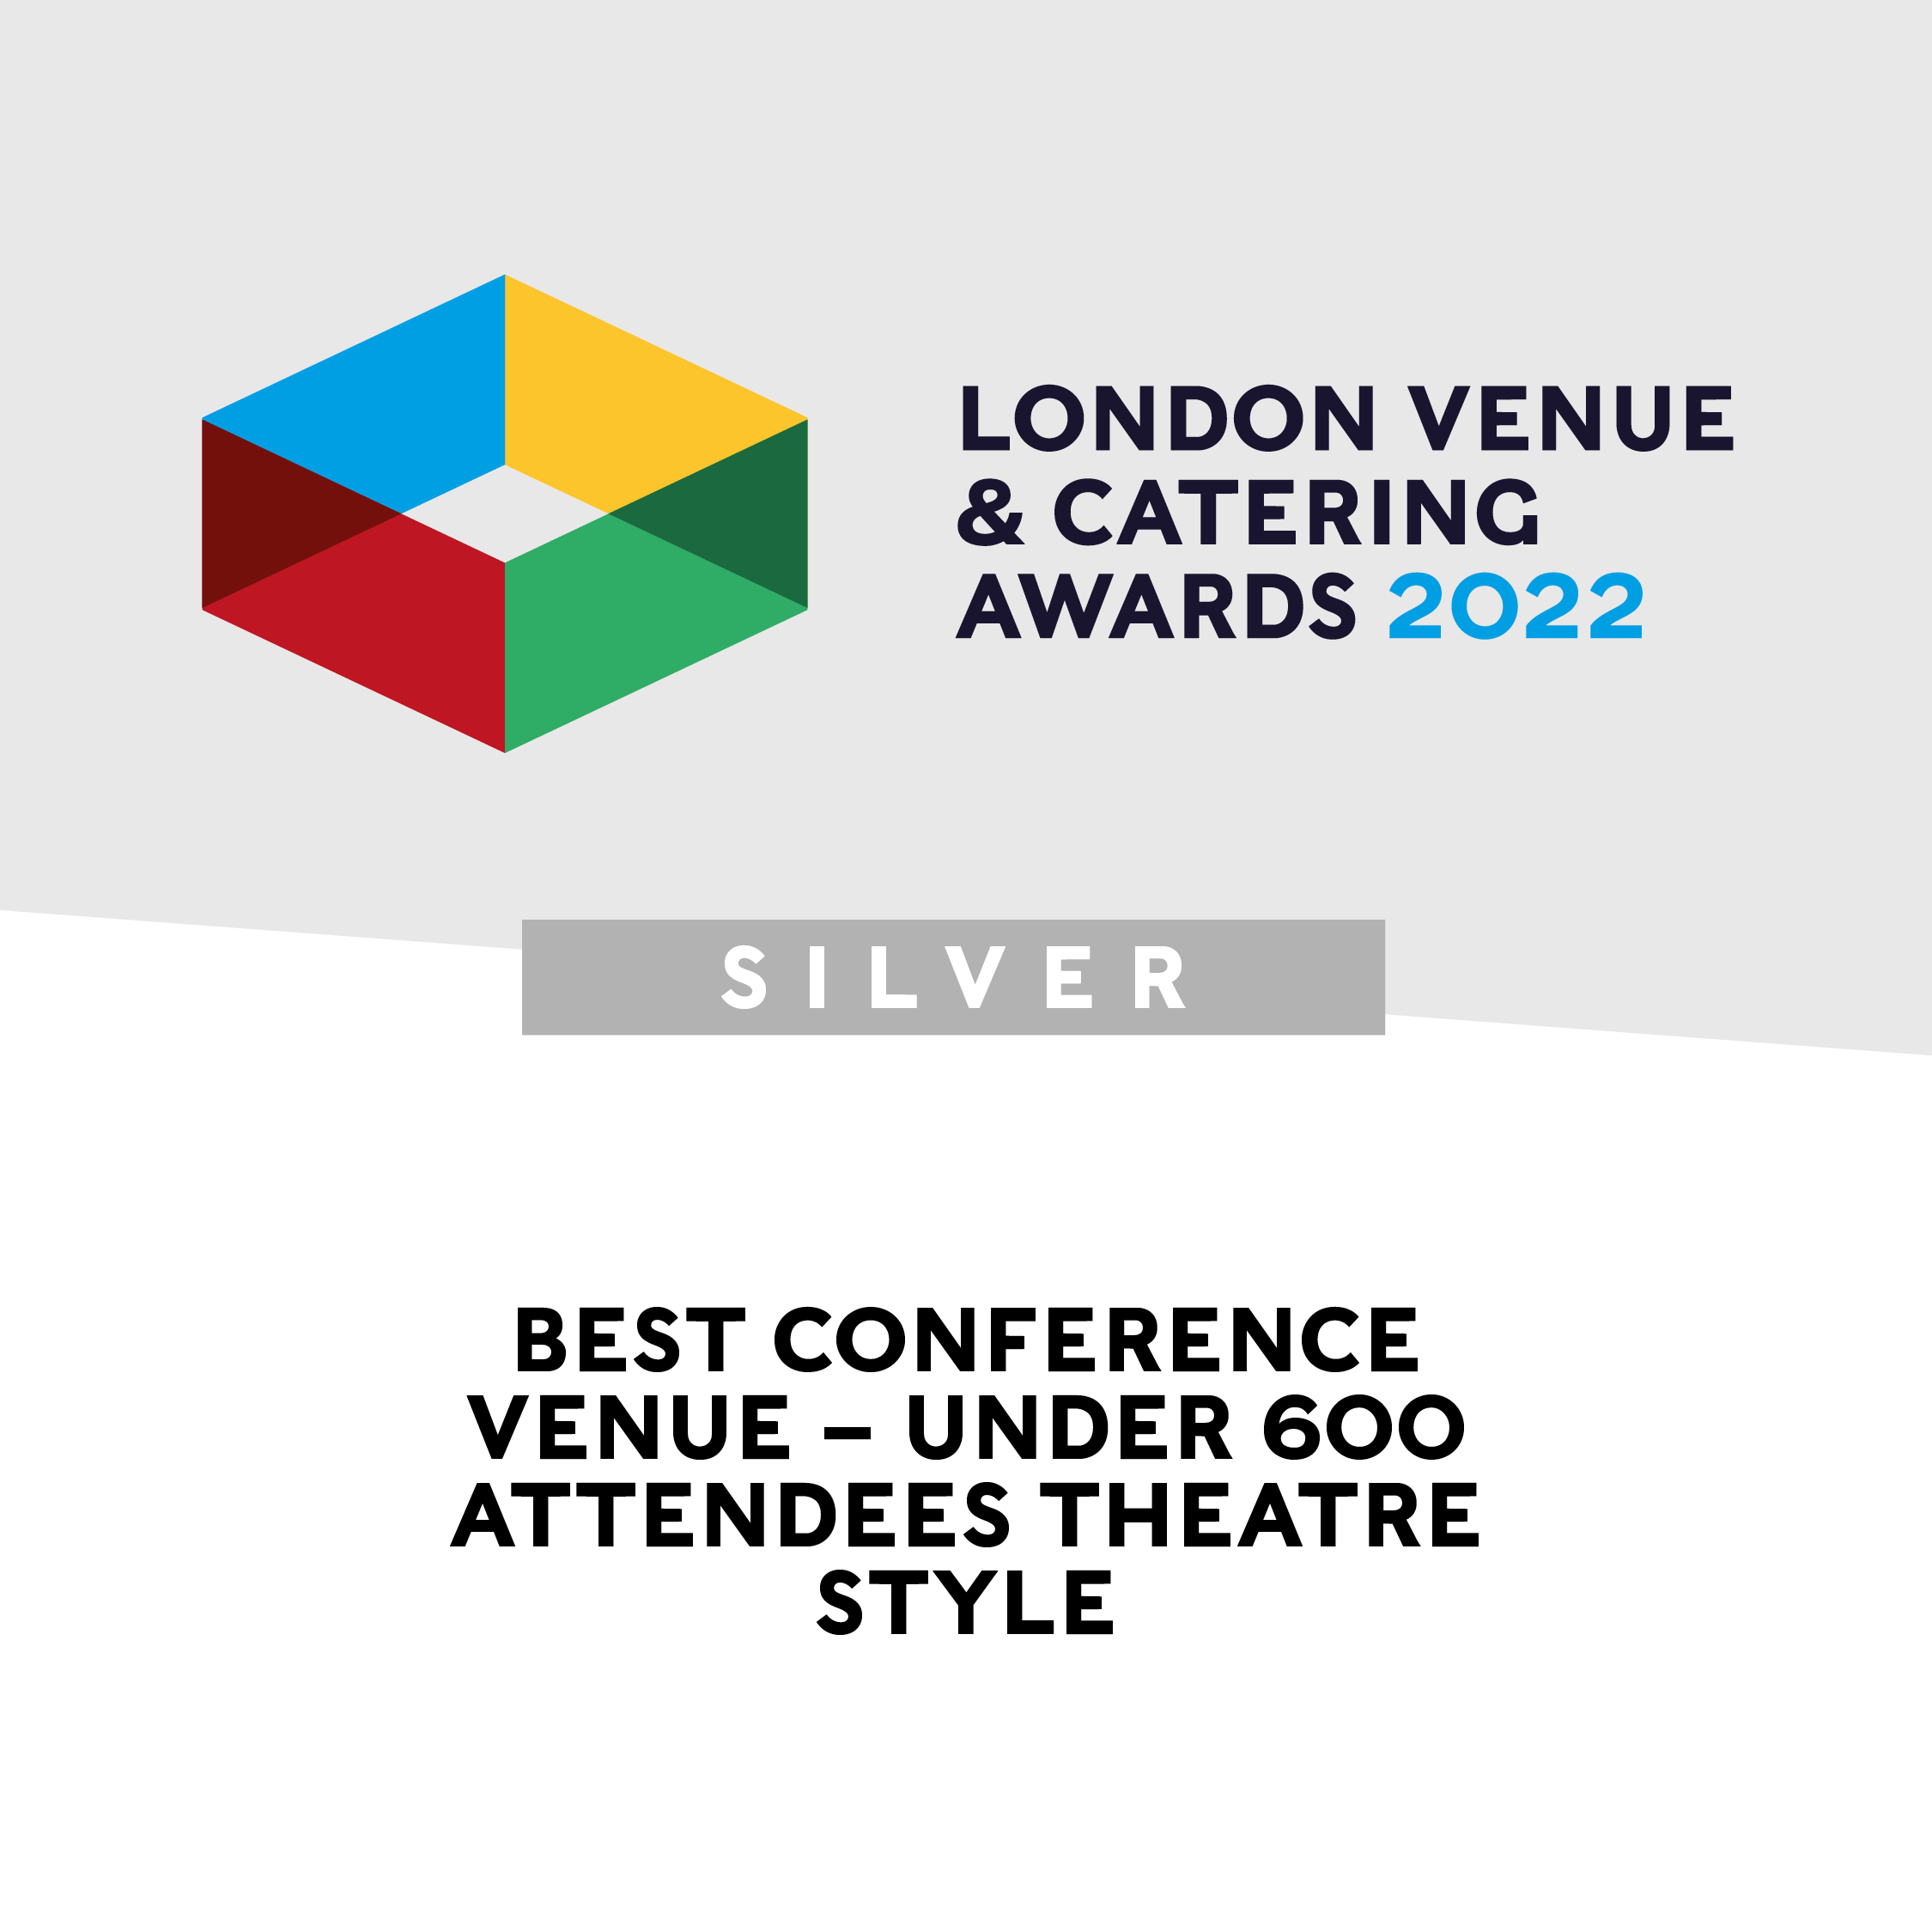 London Venue & Catering Awards 2022 Silver Best Conference Venue – Under 600 Attendees Theatre Style